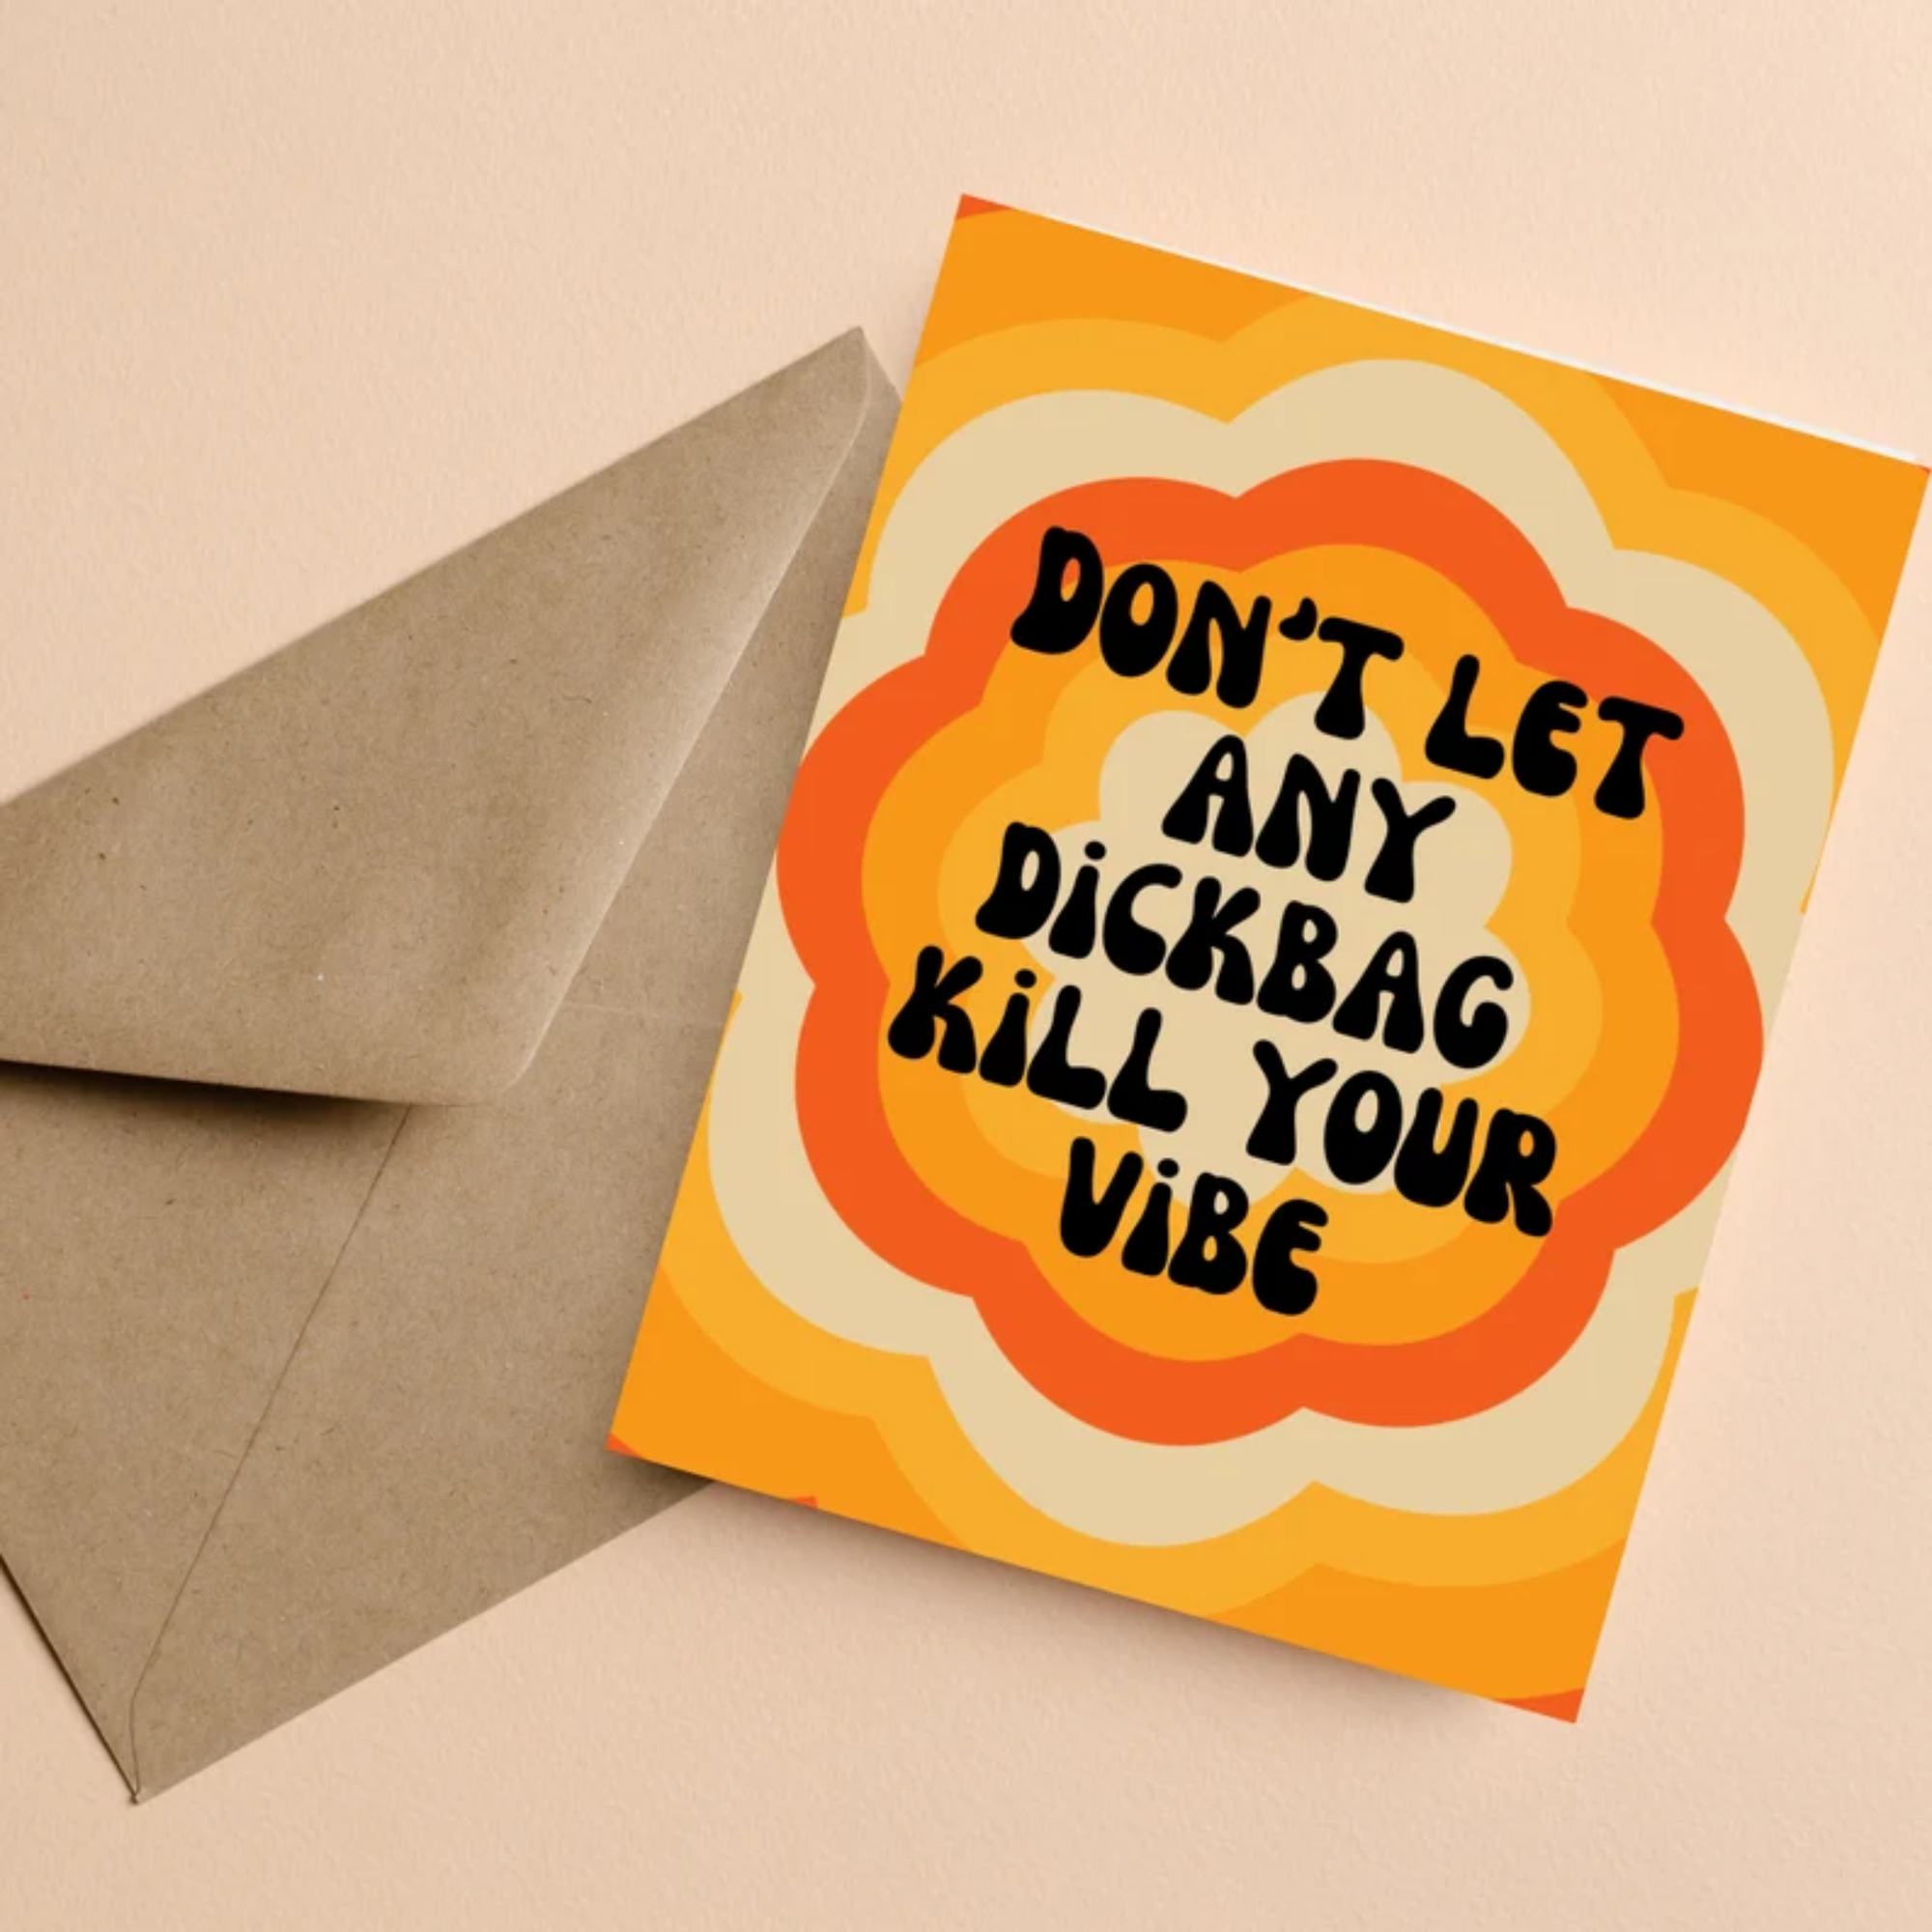 Don't Let Any Dickbag Kill Your Vibe Card